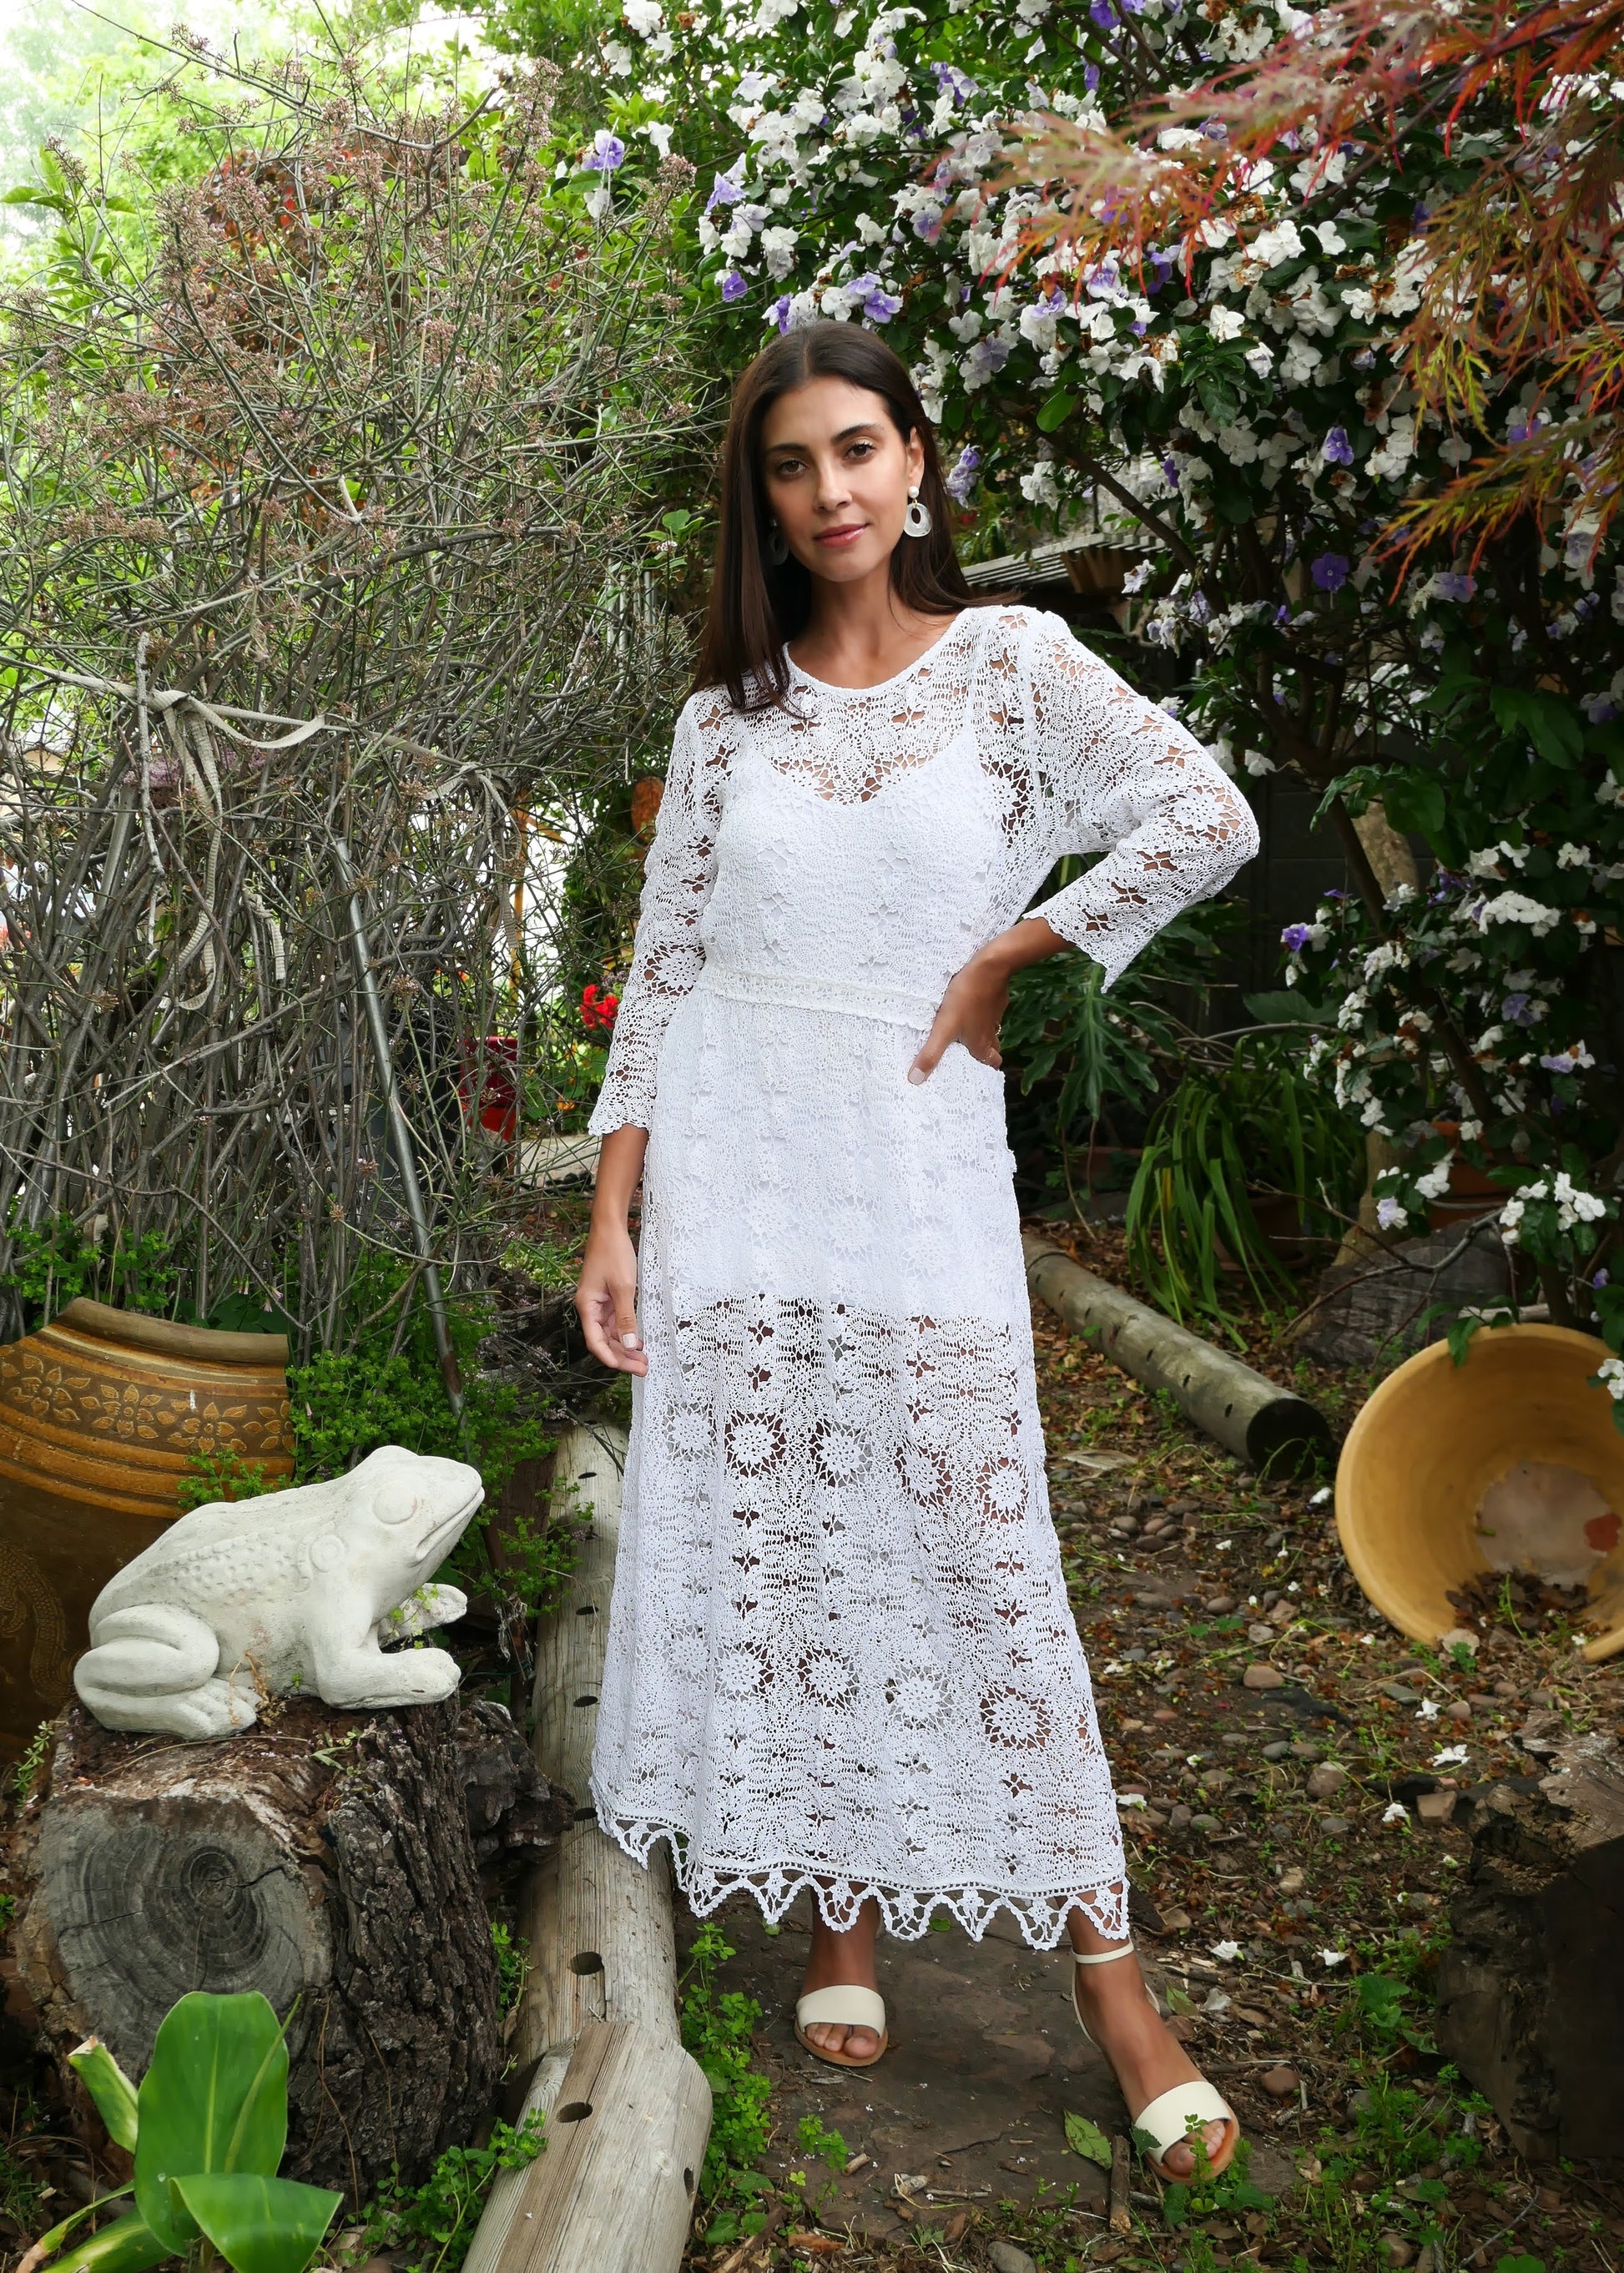 A maxi dress with a classic silhouette, long sleeves, and a comfortable elastic waistband. Stitched together by hand using individual vintage doily lace pieces. Throw it over a white slip and a pair of open-toe heels for a stroll out on the town at your favorite beach destination. Color: White